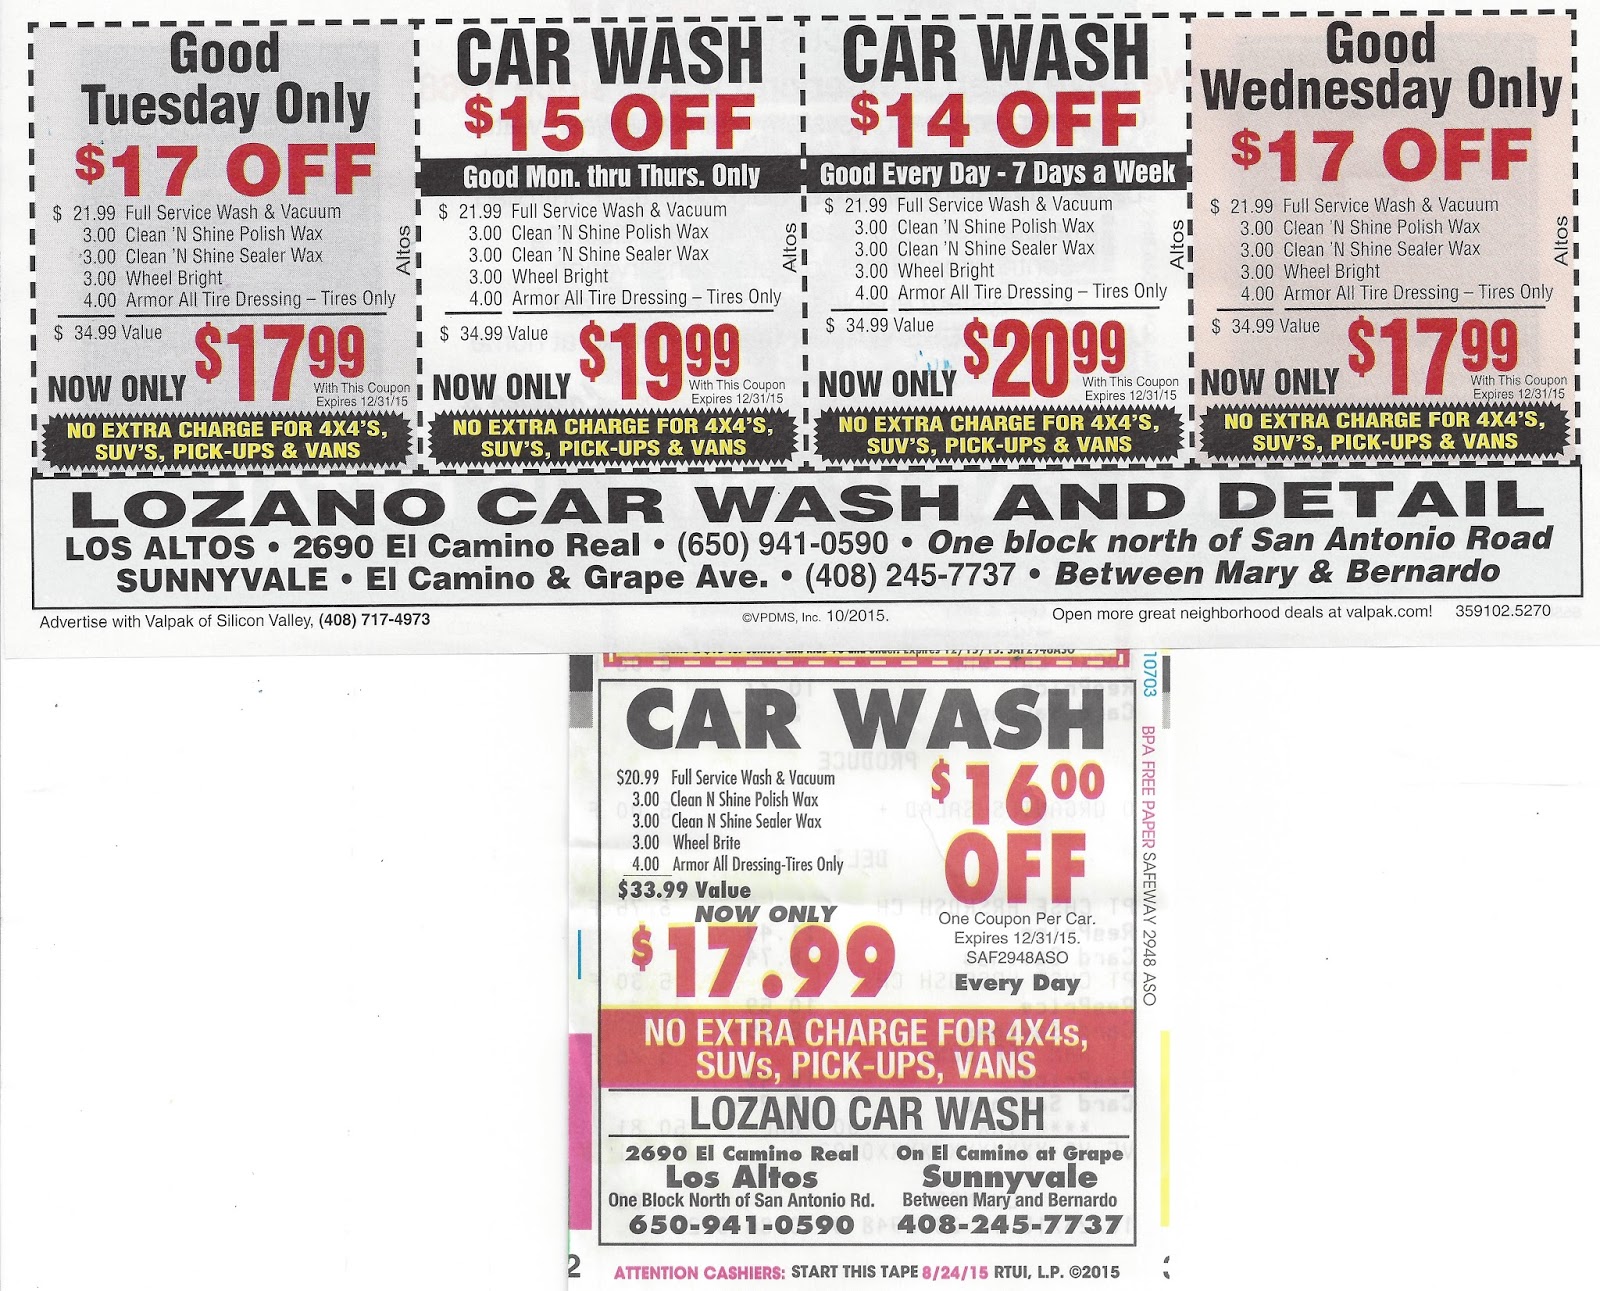 Kirk's Market Thoughts Lozano's Car Wash Coupons 38 gain in Two Years